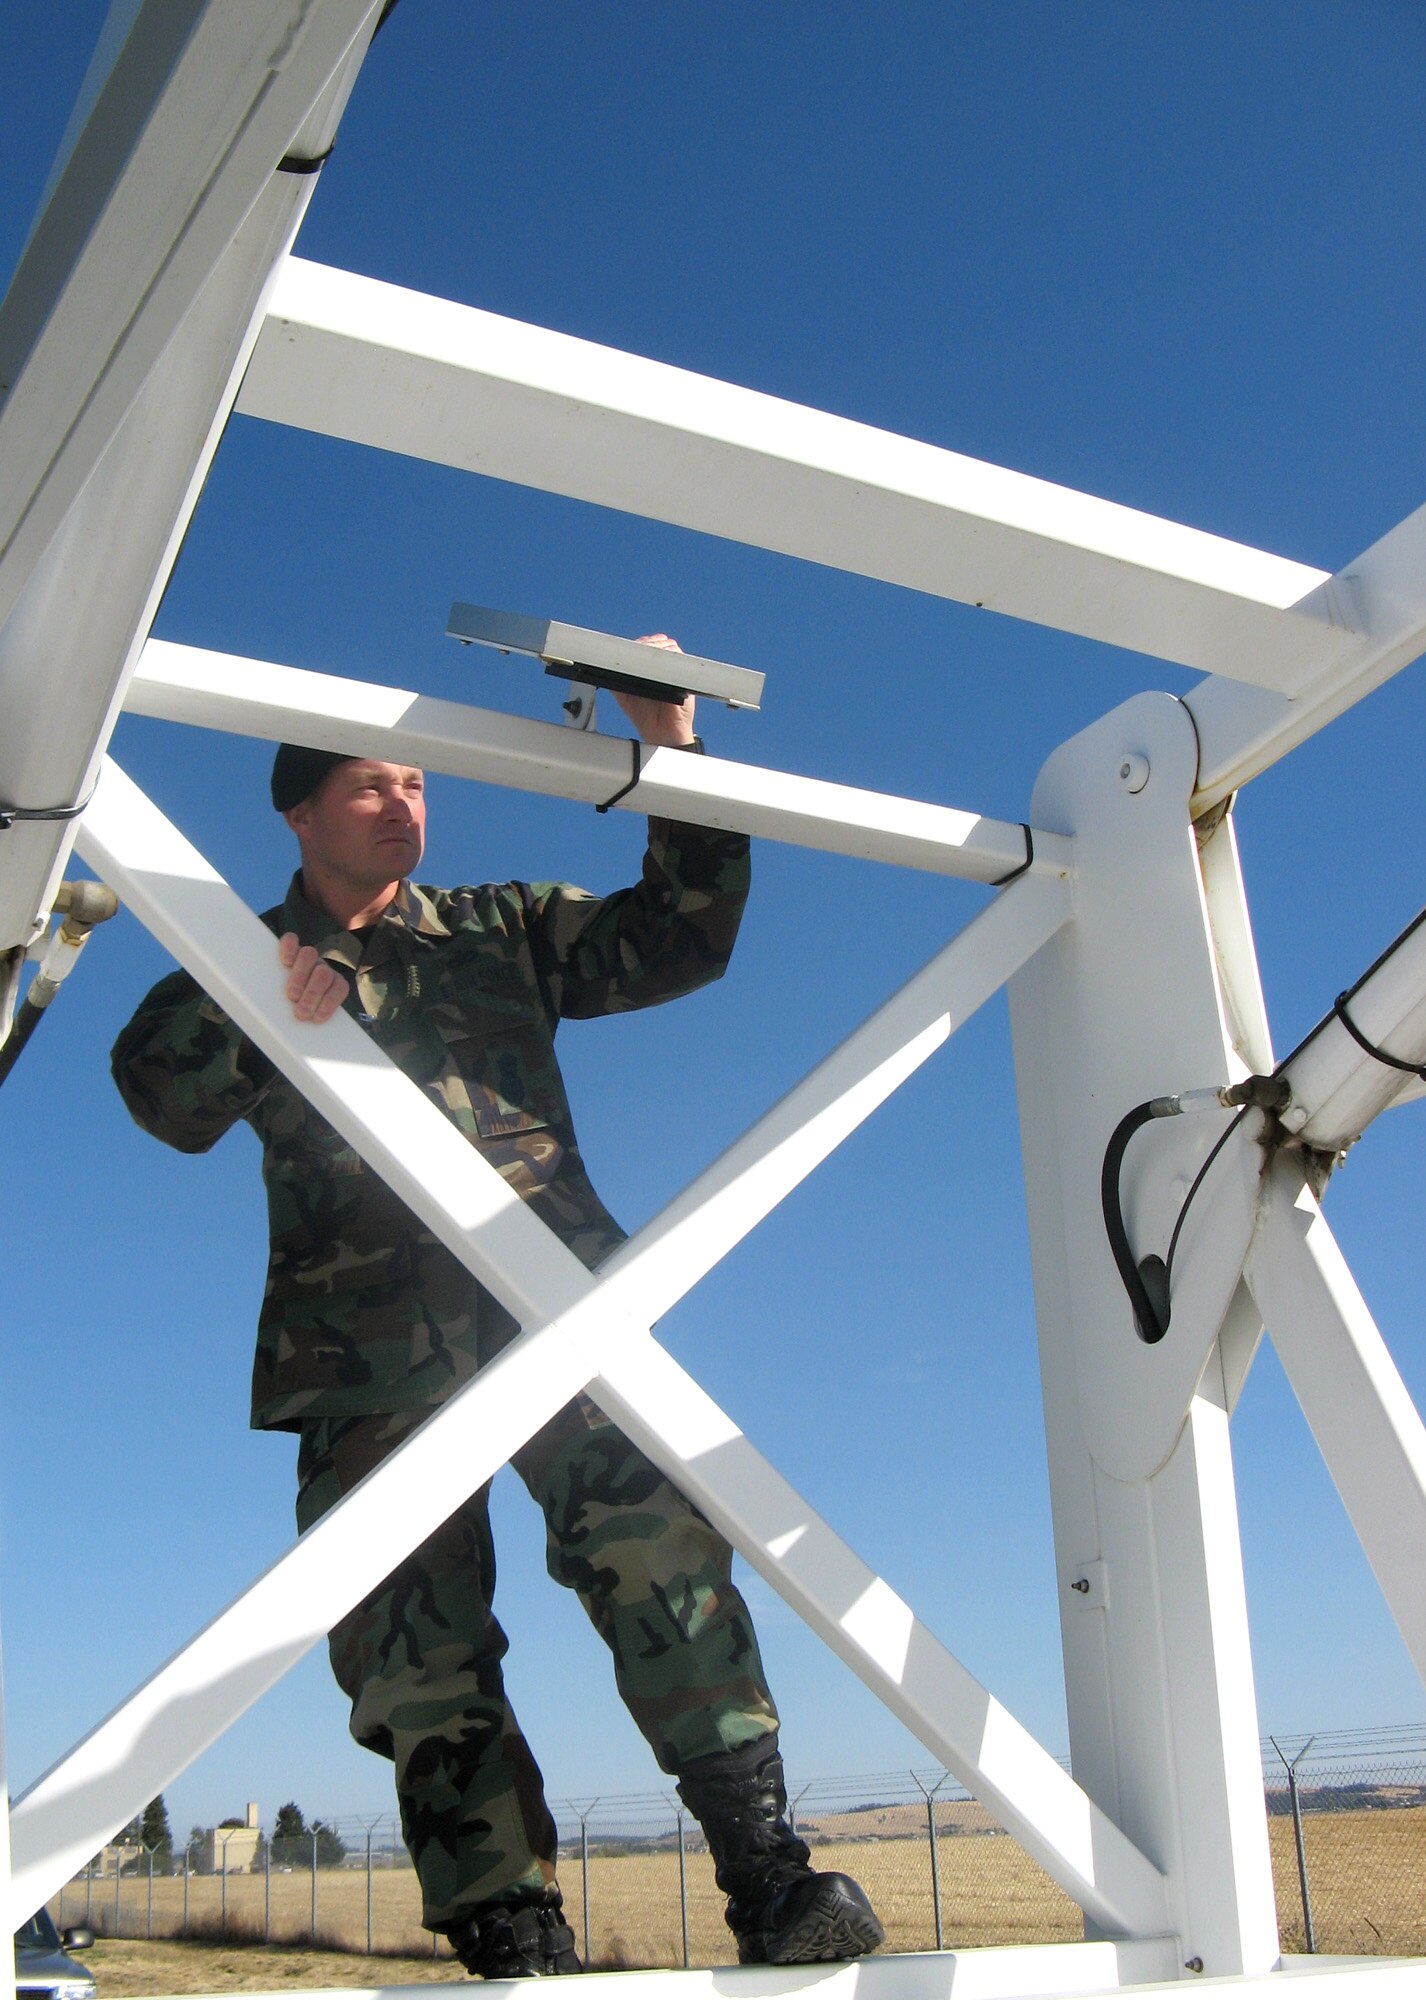 FAIRCHILD AIR FORCE BASE, Wash. – Tech. Segt. Dan Merrill, Fairchild NCO-in-charge of the Installation Security Constable program, checks the bars on the “Sky Watch” tower, a mobile surveillance tower, prior to positioning it. (U.S. Air Force photo/Shadi May)